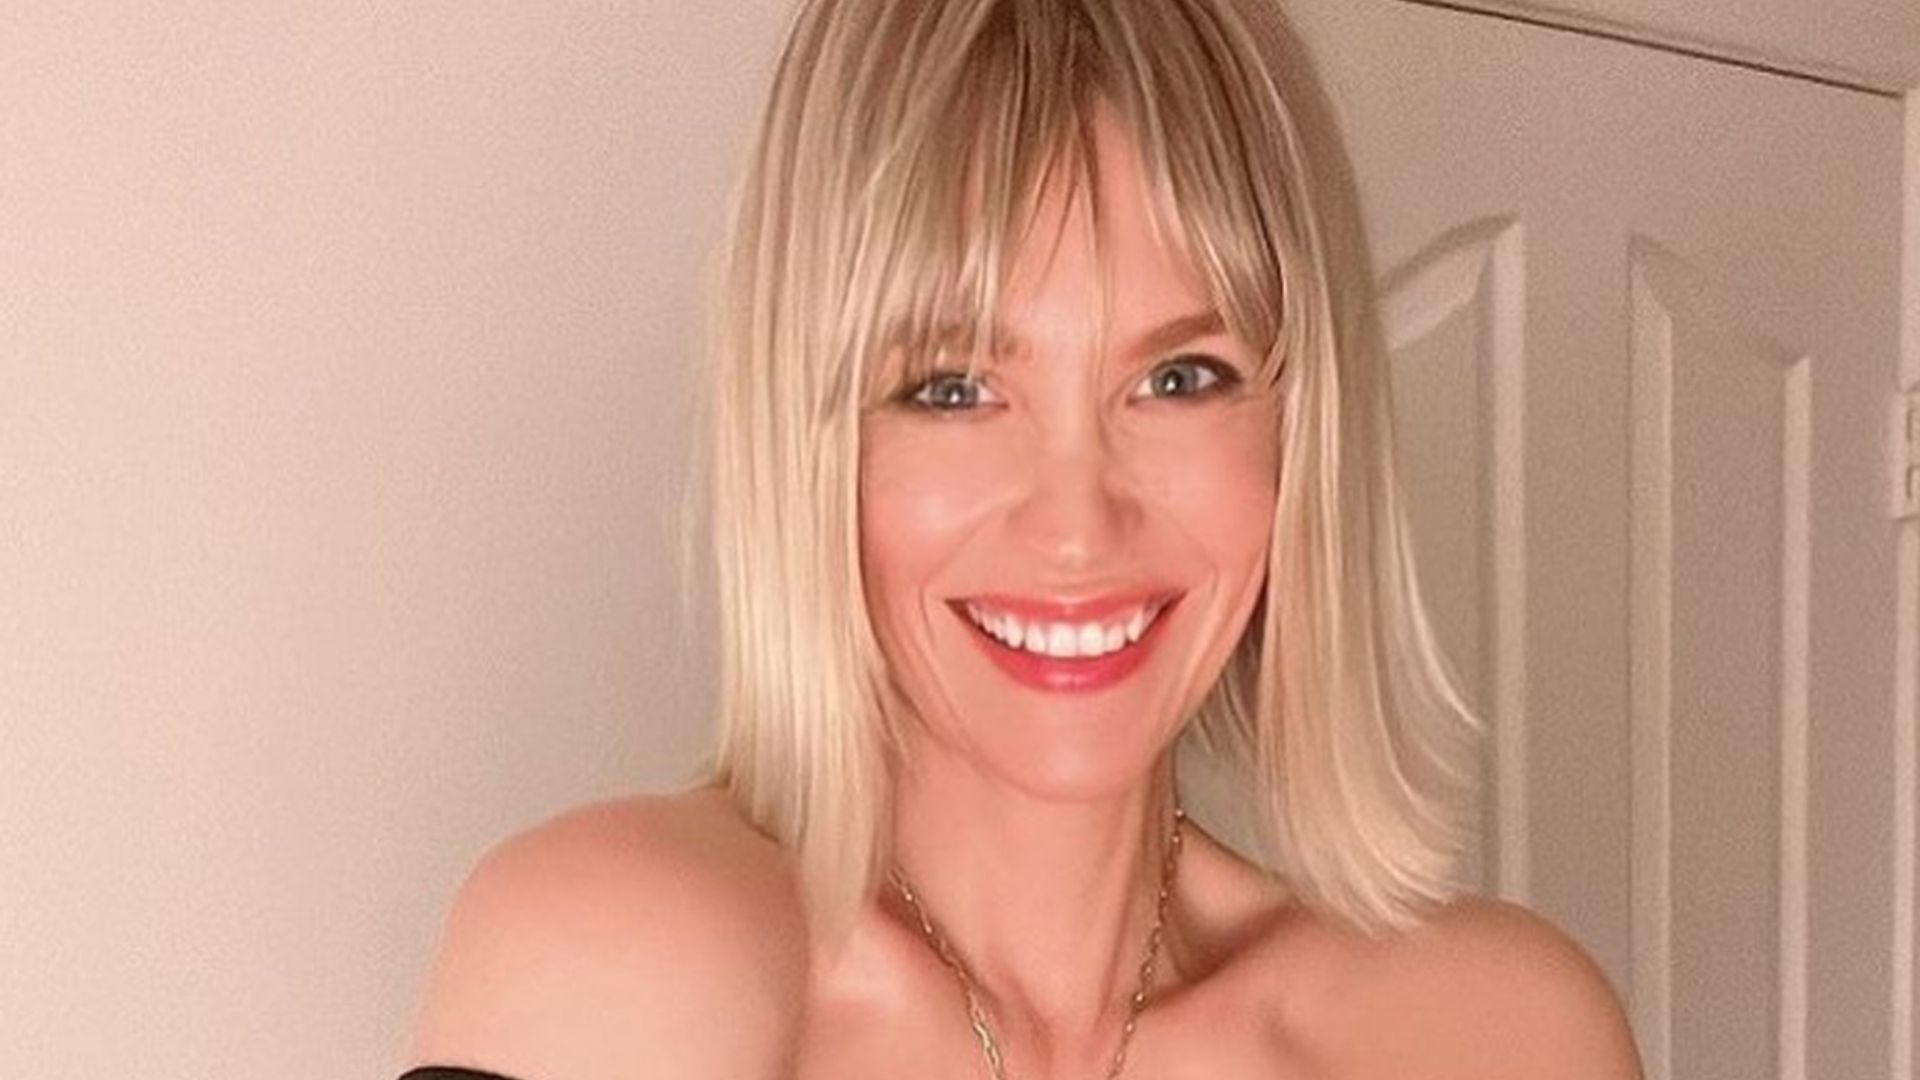 January Jones stuns in plunging sheer lace top – fans react